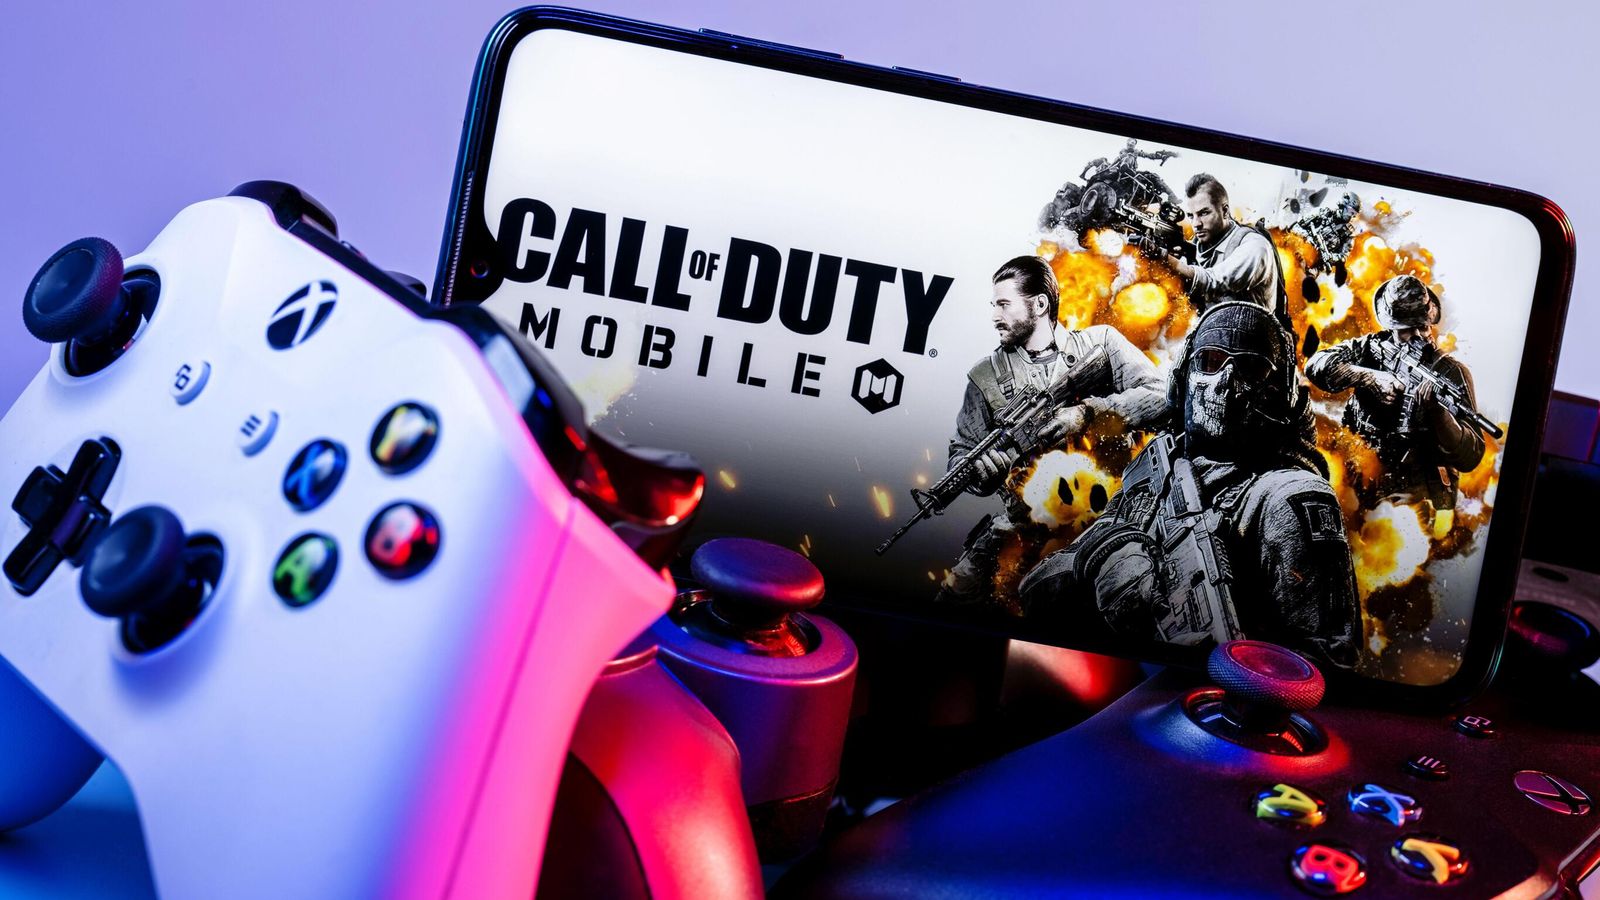 Microsoft can go forward with Activision Blizzard purchase after